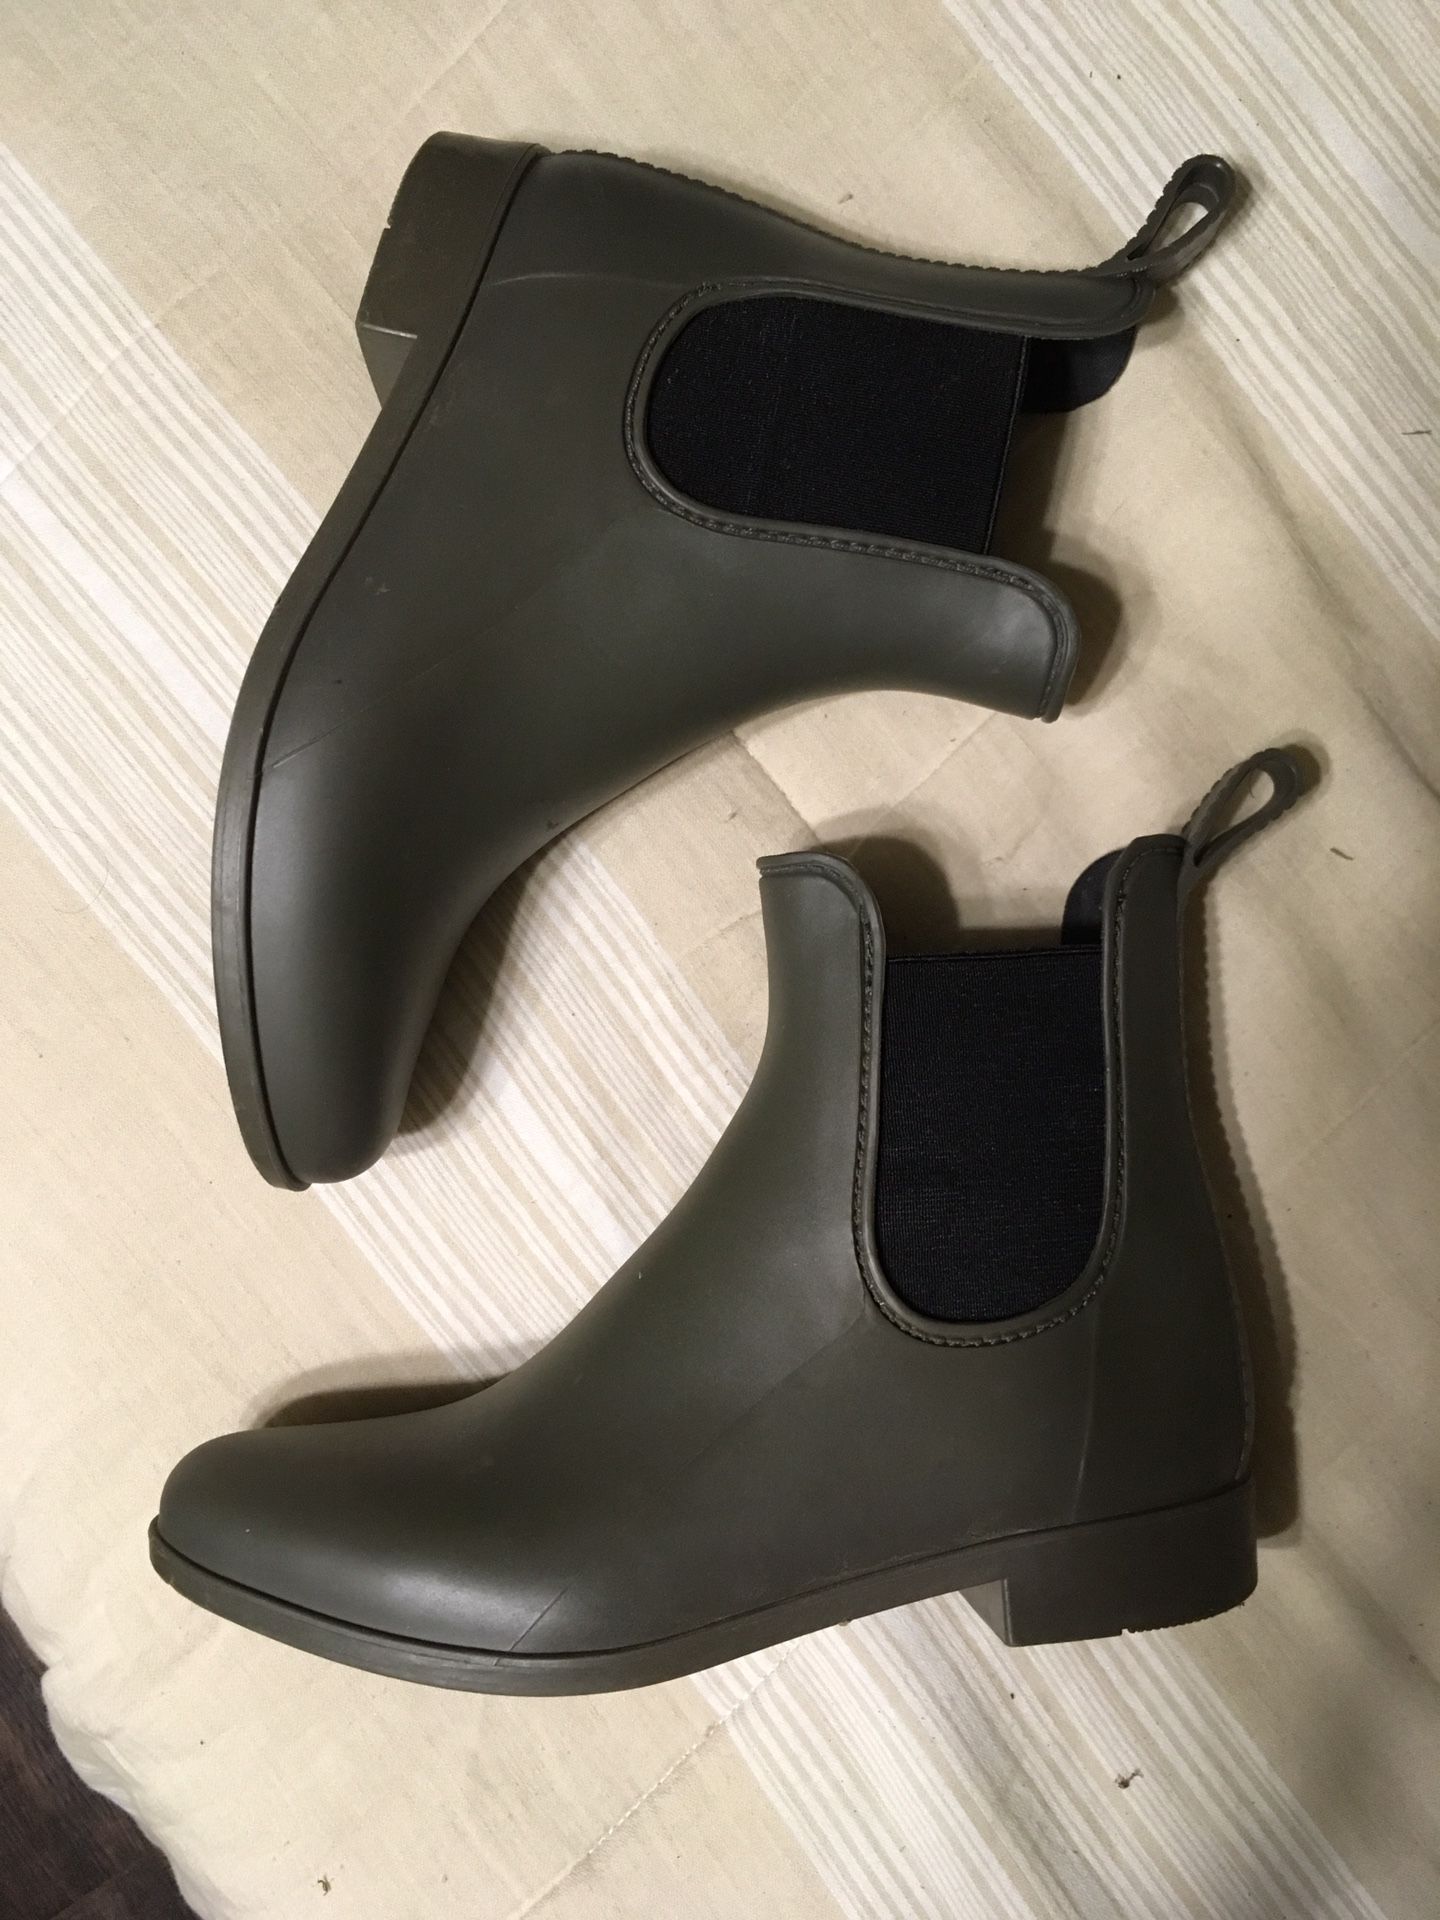 Rubber Ankle Boots—Size 6